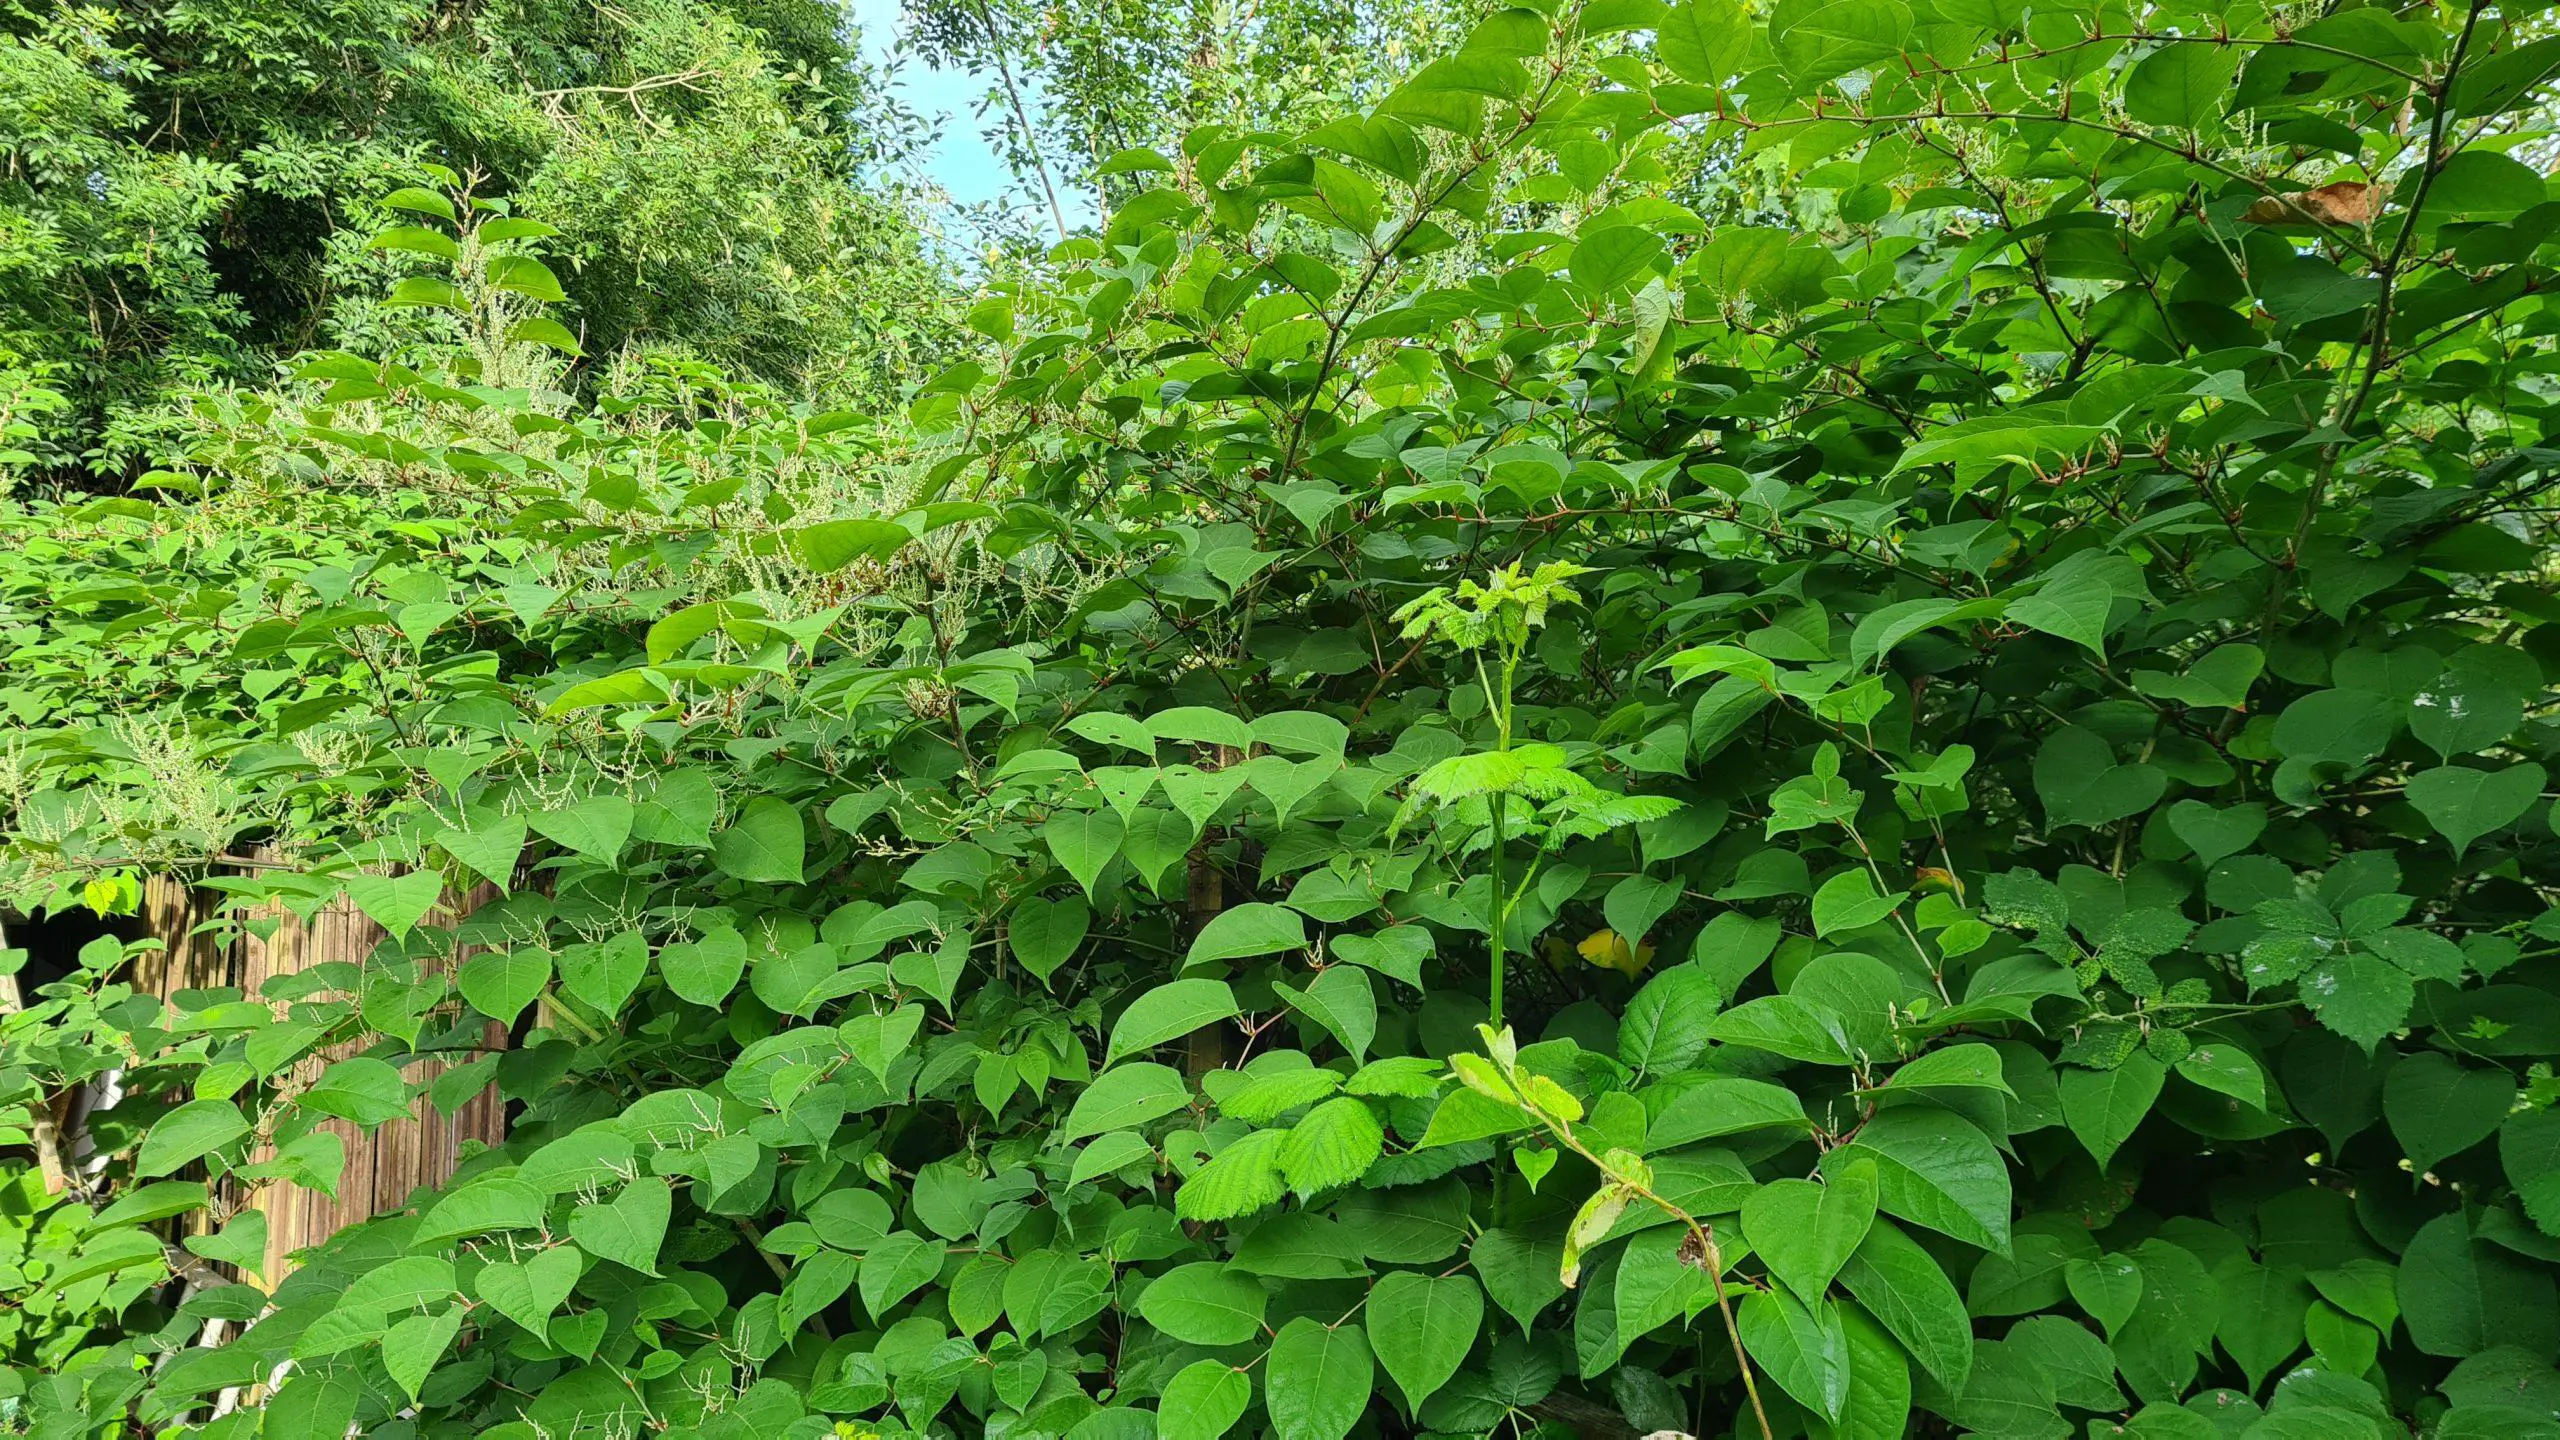 Japanese knotweed can devastate the local ecosystem and effect both properties and wildlife